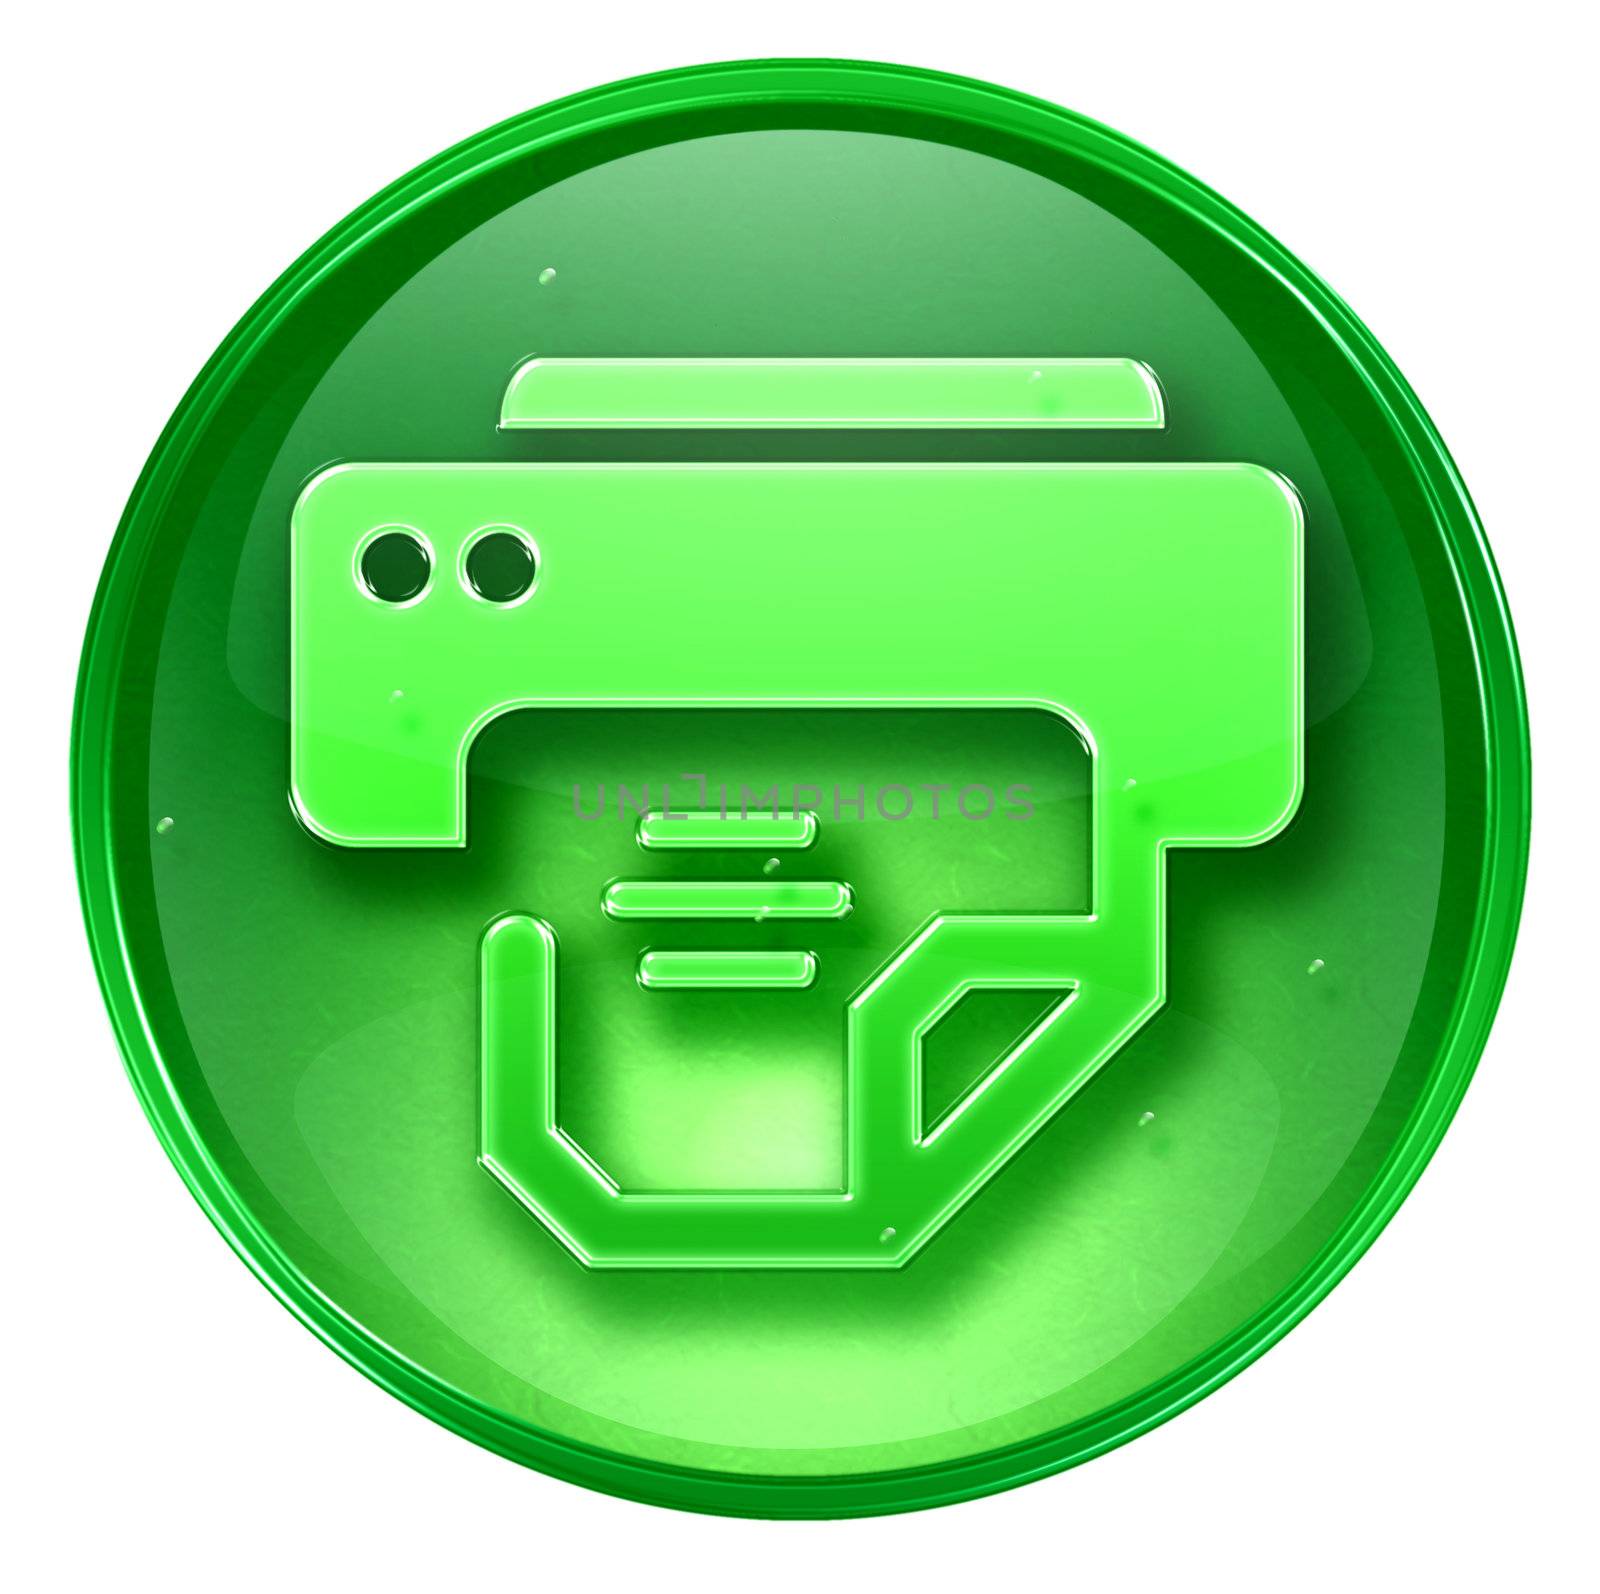 Printer icon green, isolated on white background. 